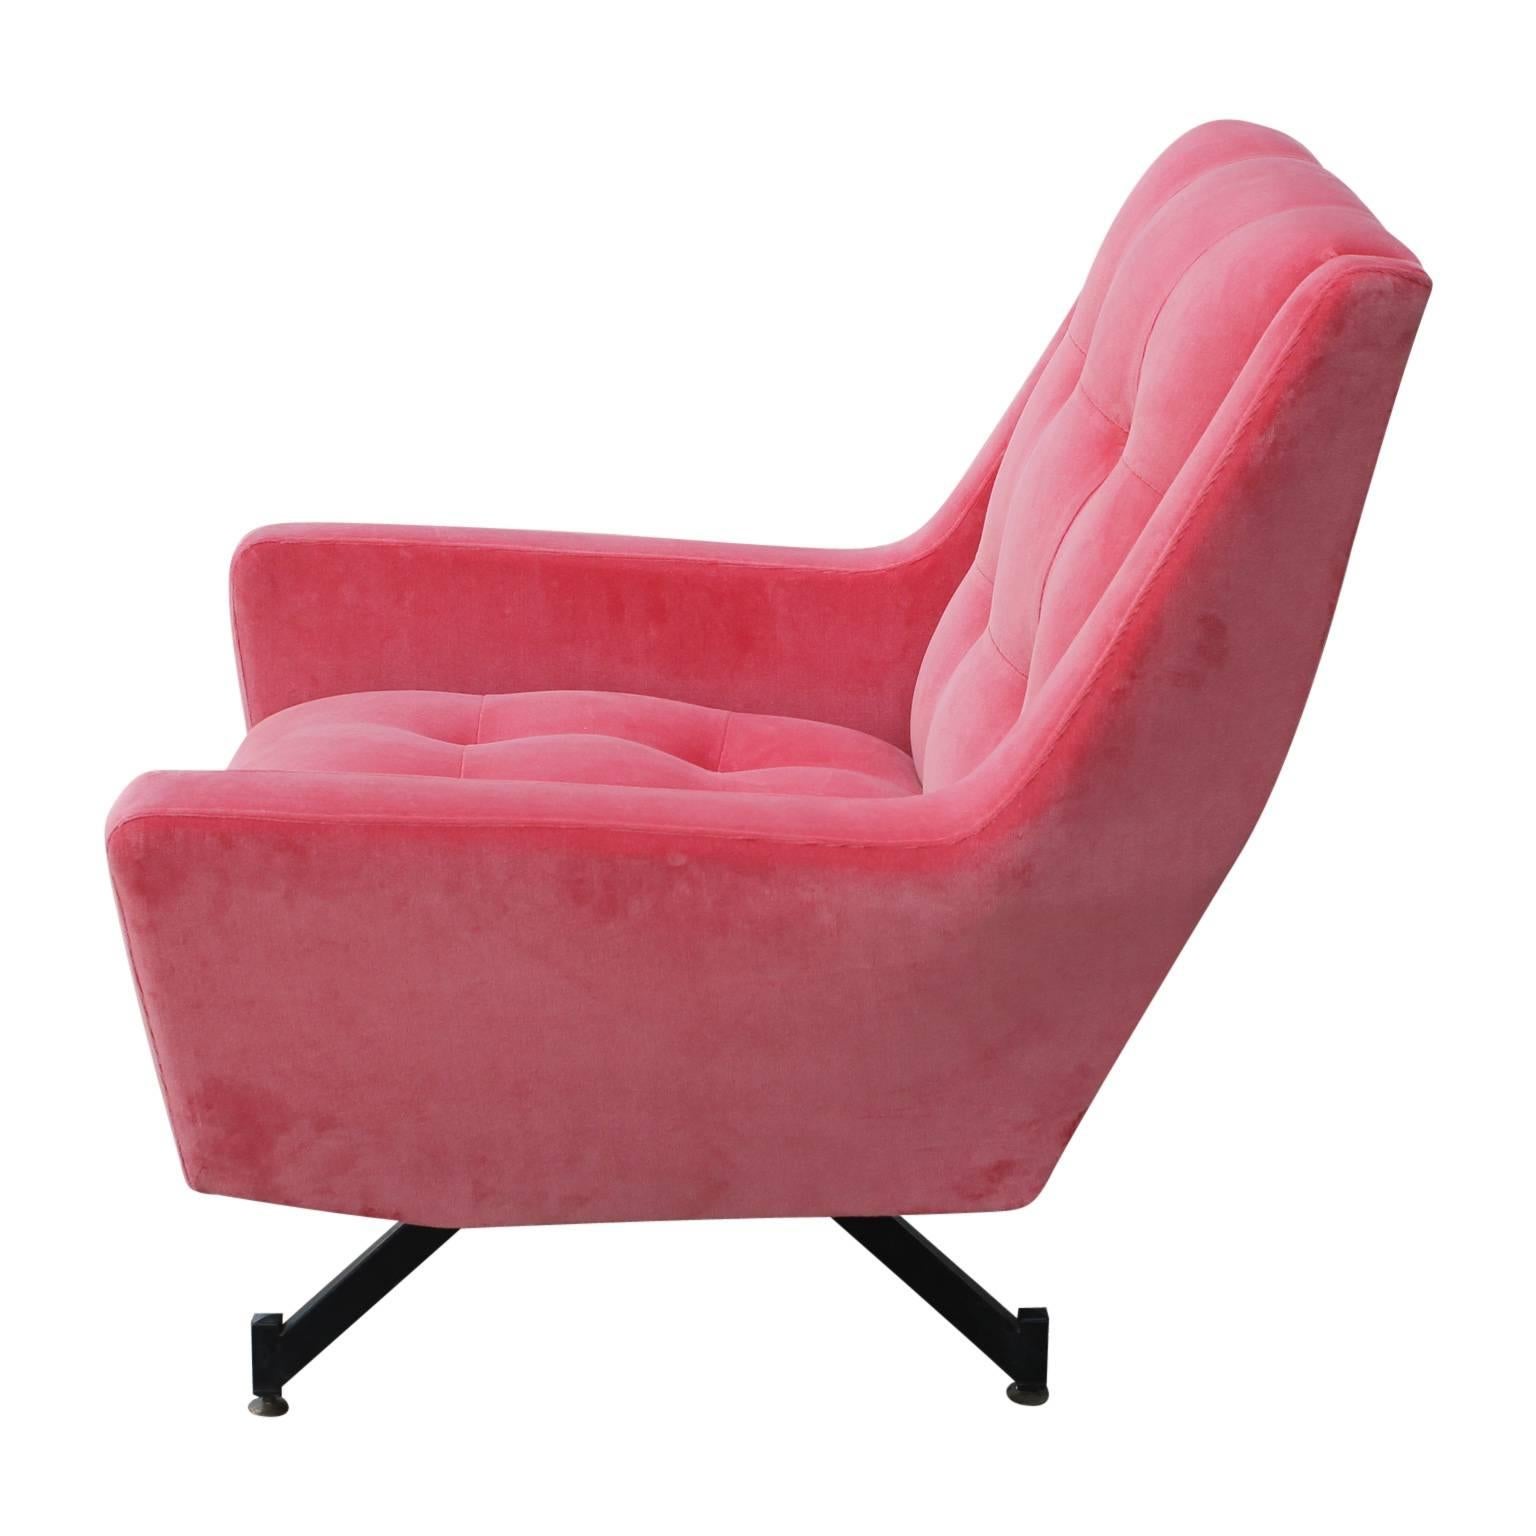 Mid-20th Century Pair of Italian Modern Tufted Lounge Chairs in Coral Pink Velvet Adjustable Legs